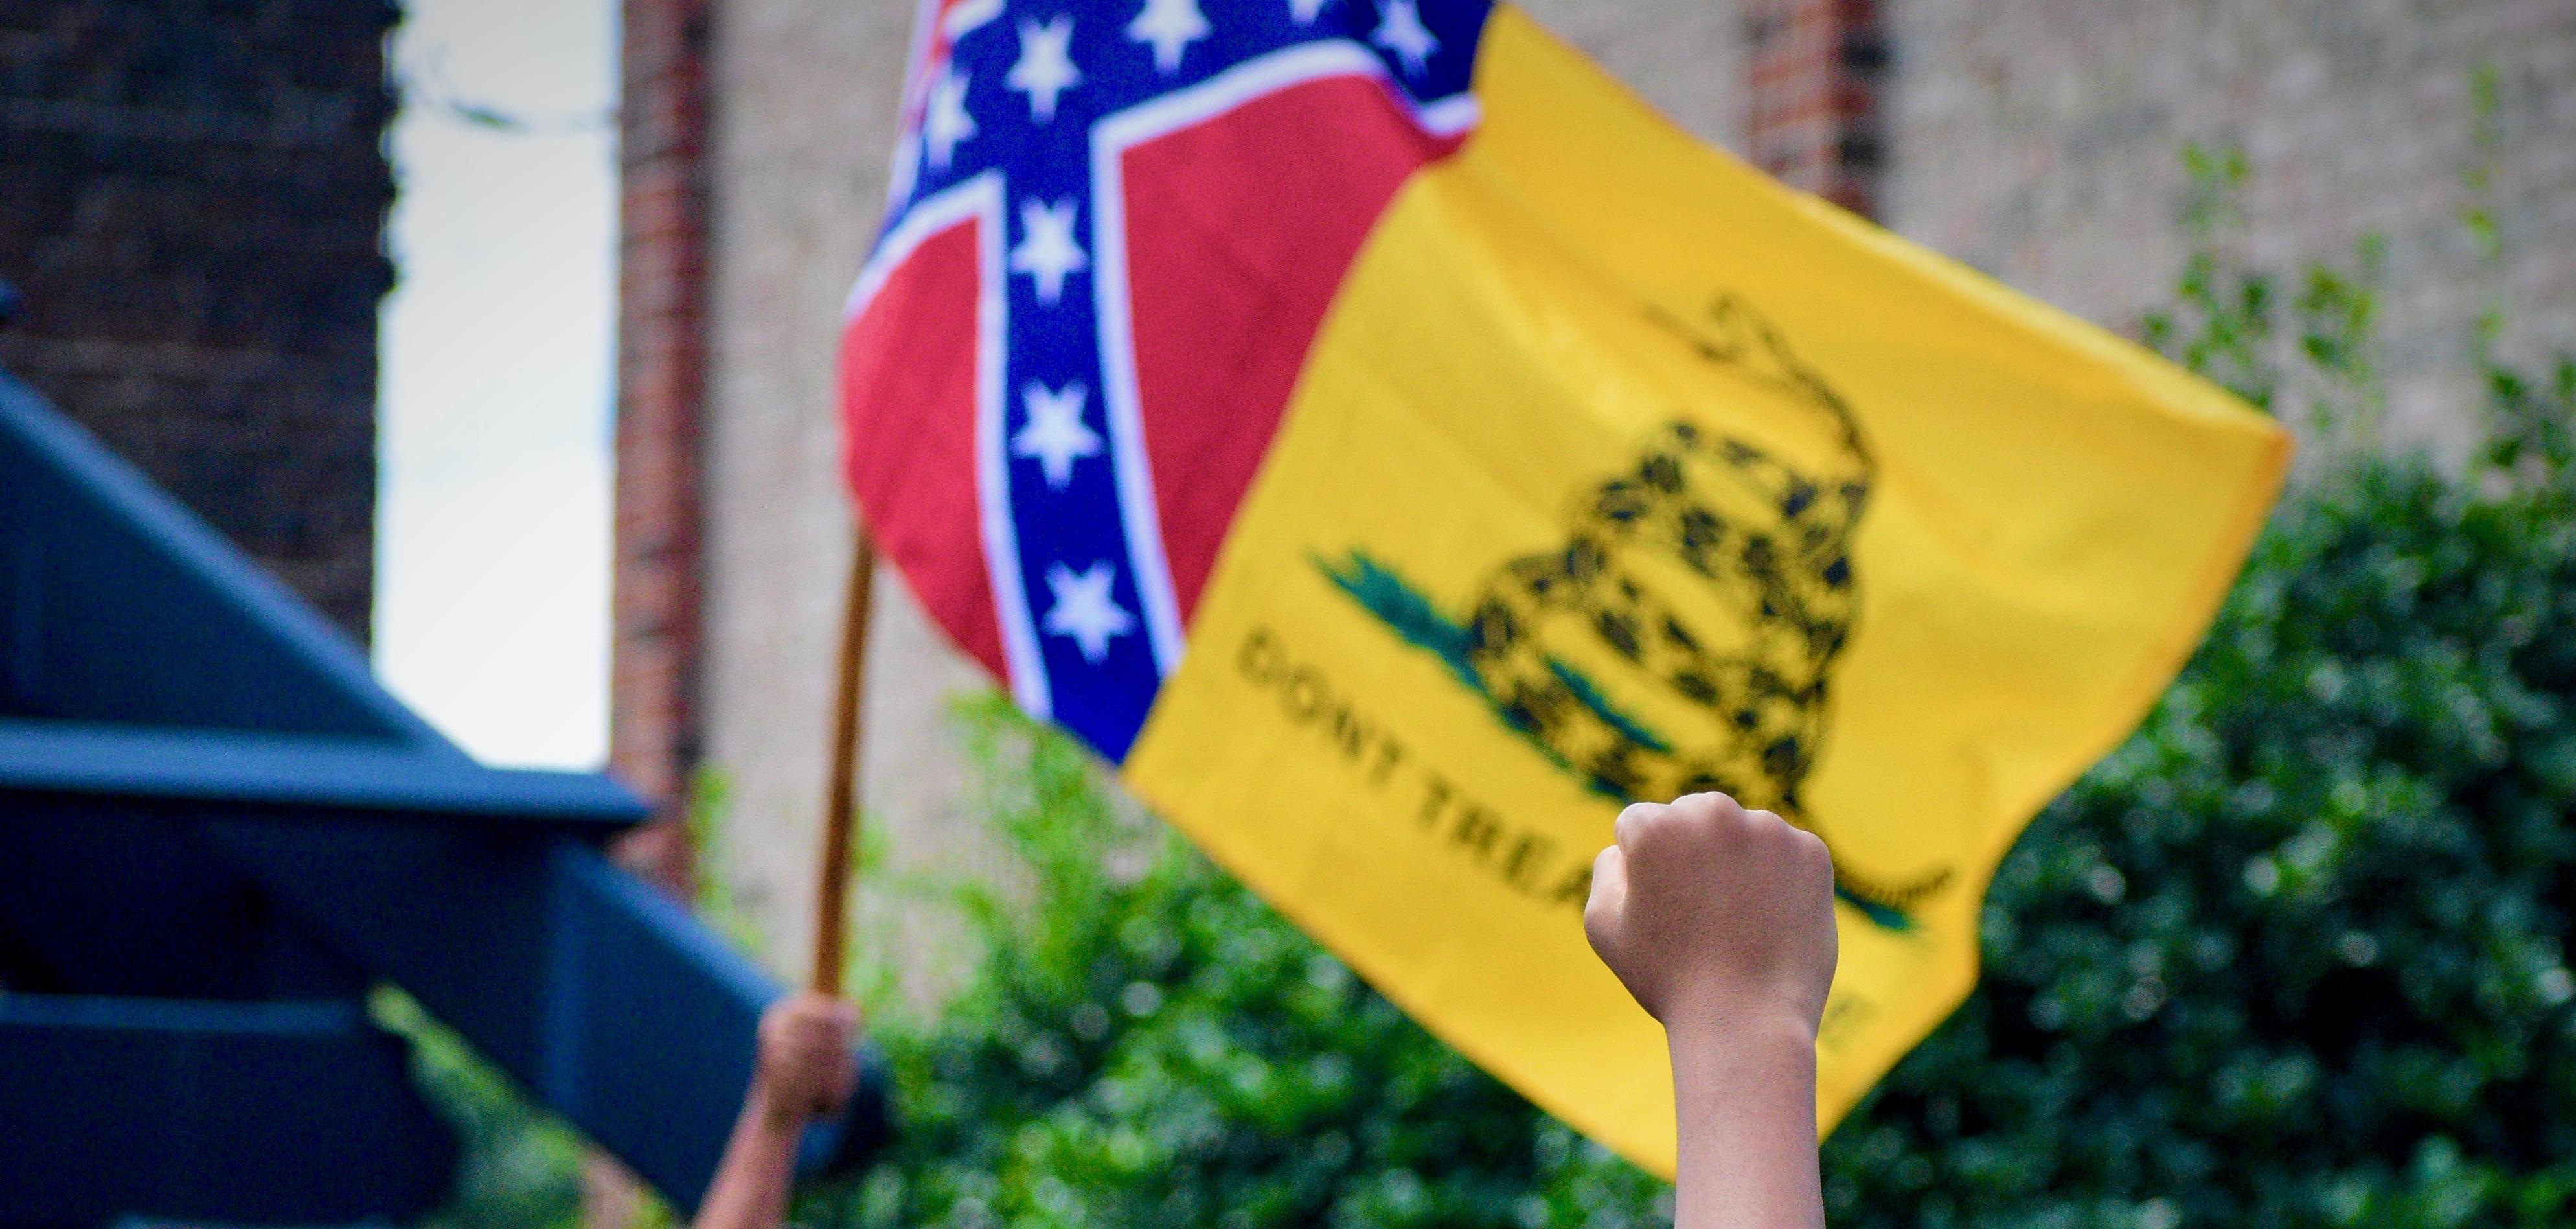 Pro-confederacy protestor holds up a confederate flag, a counter-protestor raises a fist in response. 